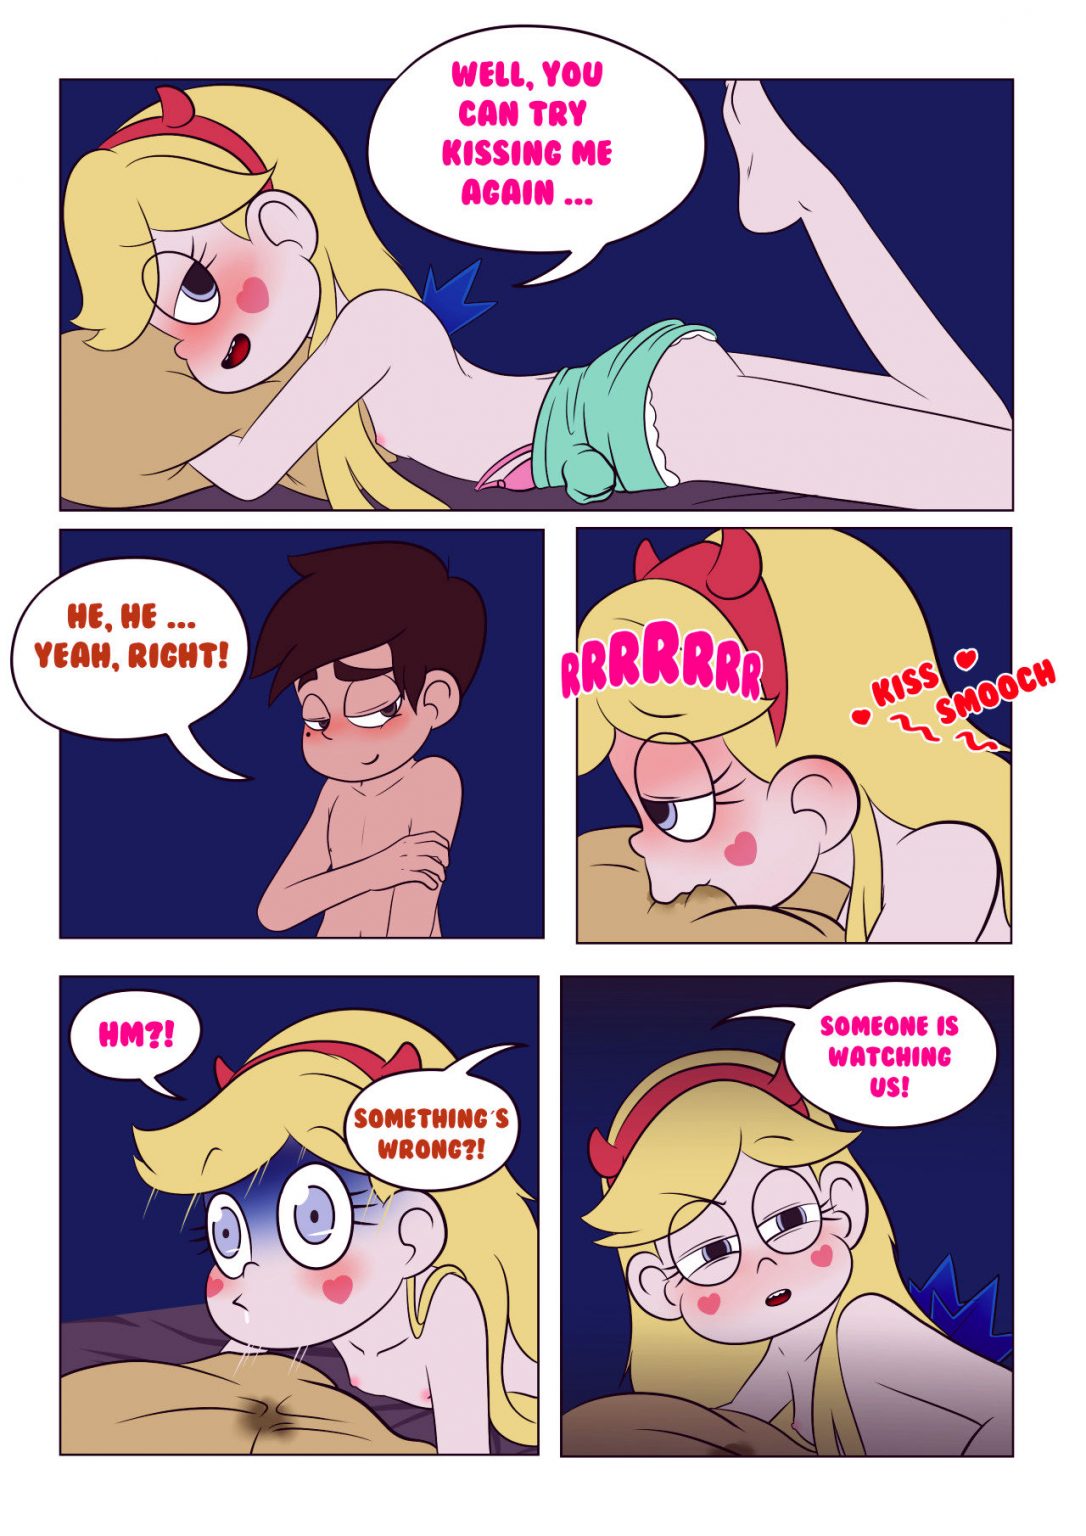 Between dimensions porn comic picture 01